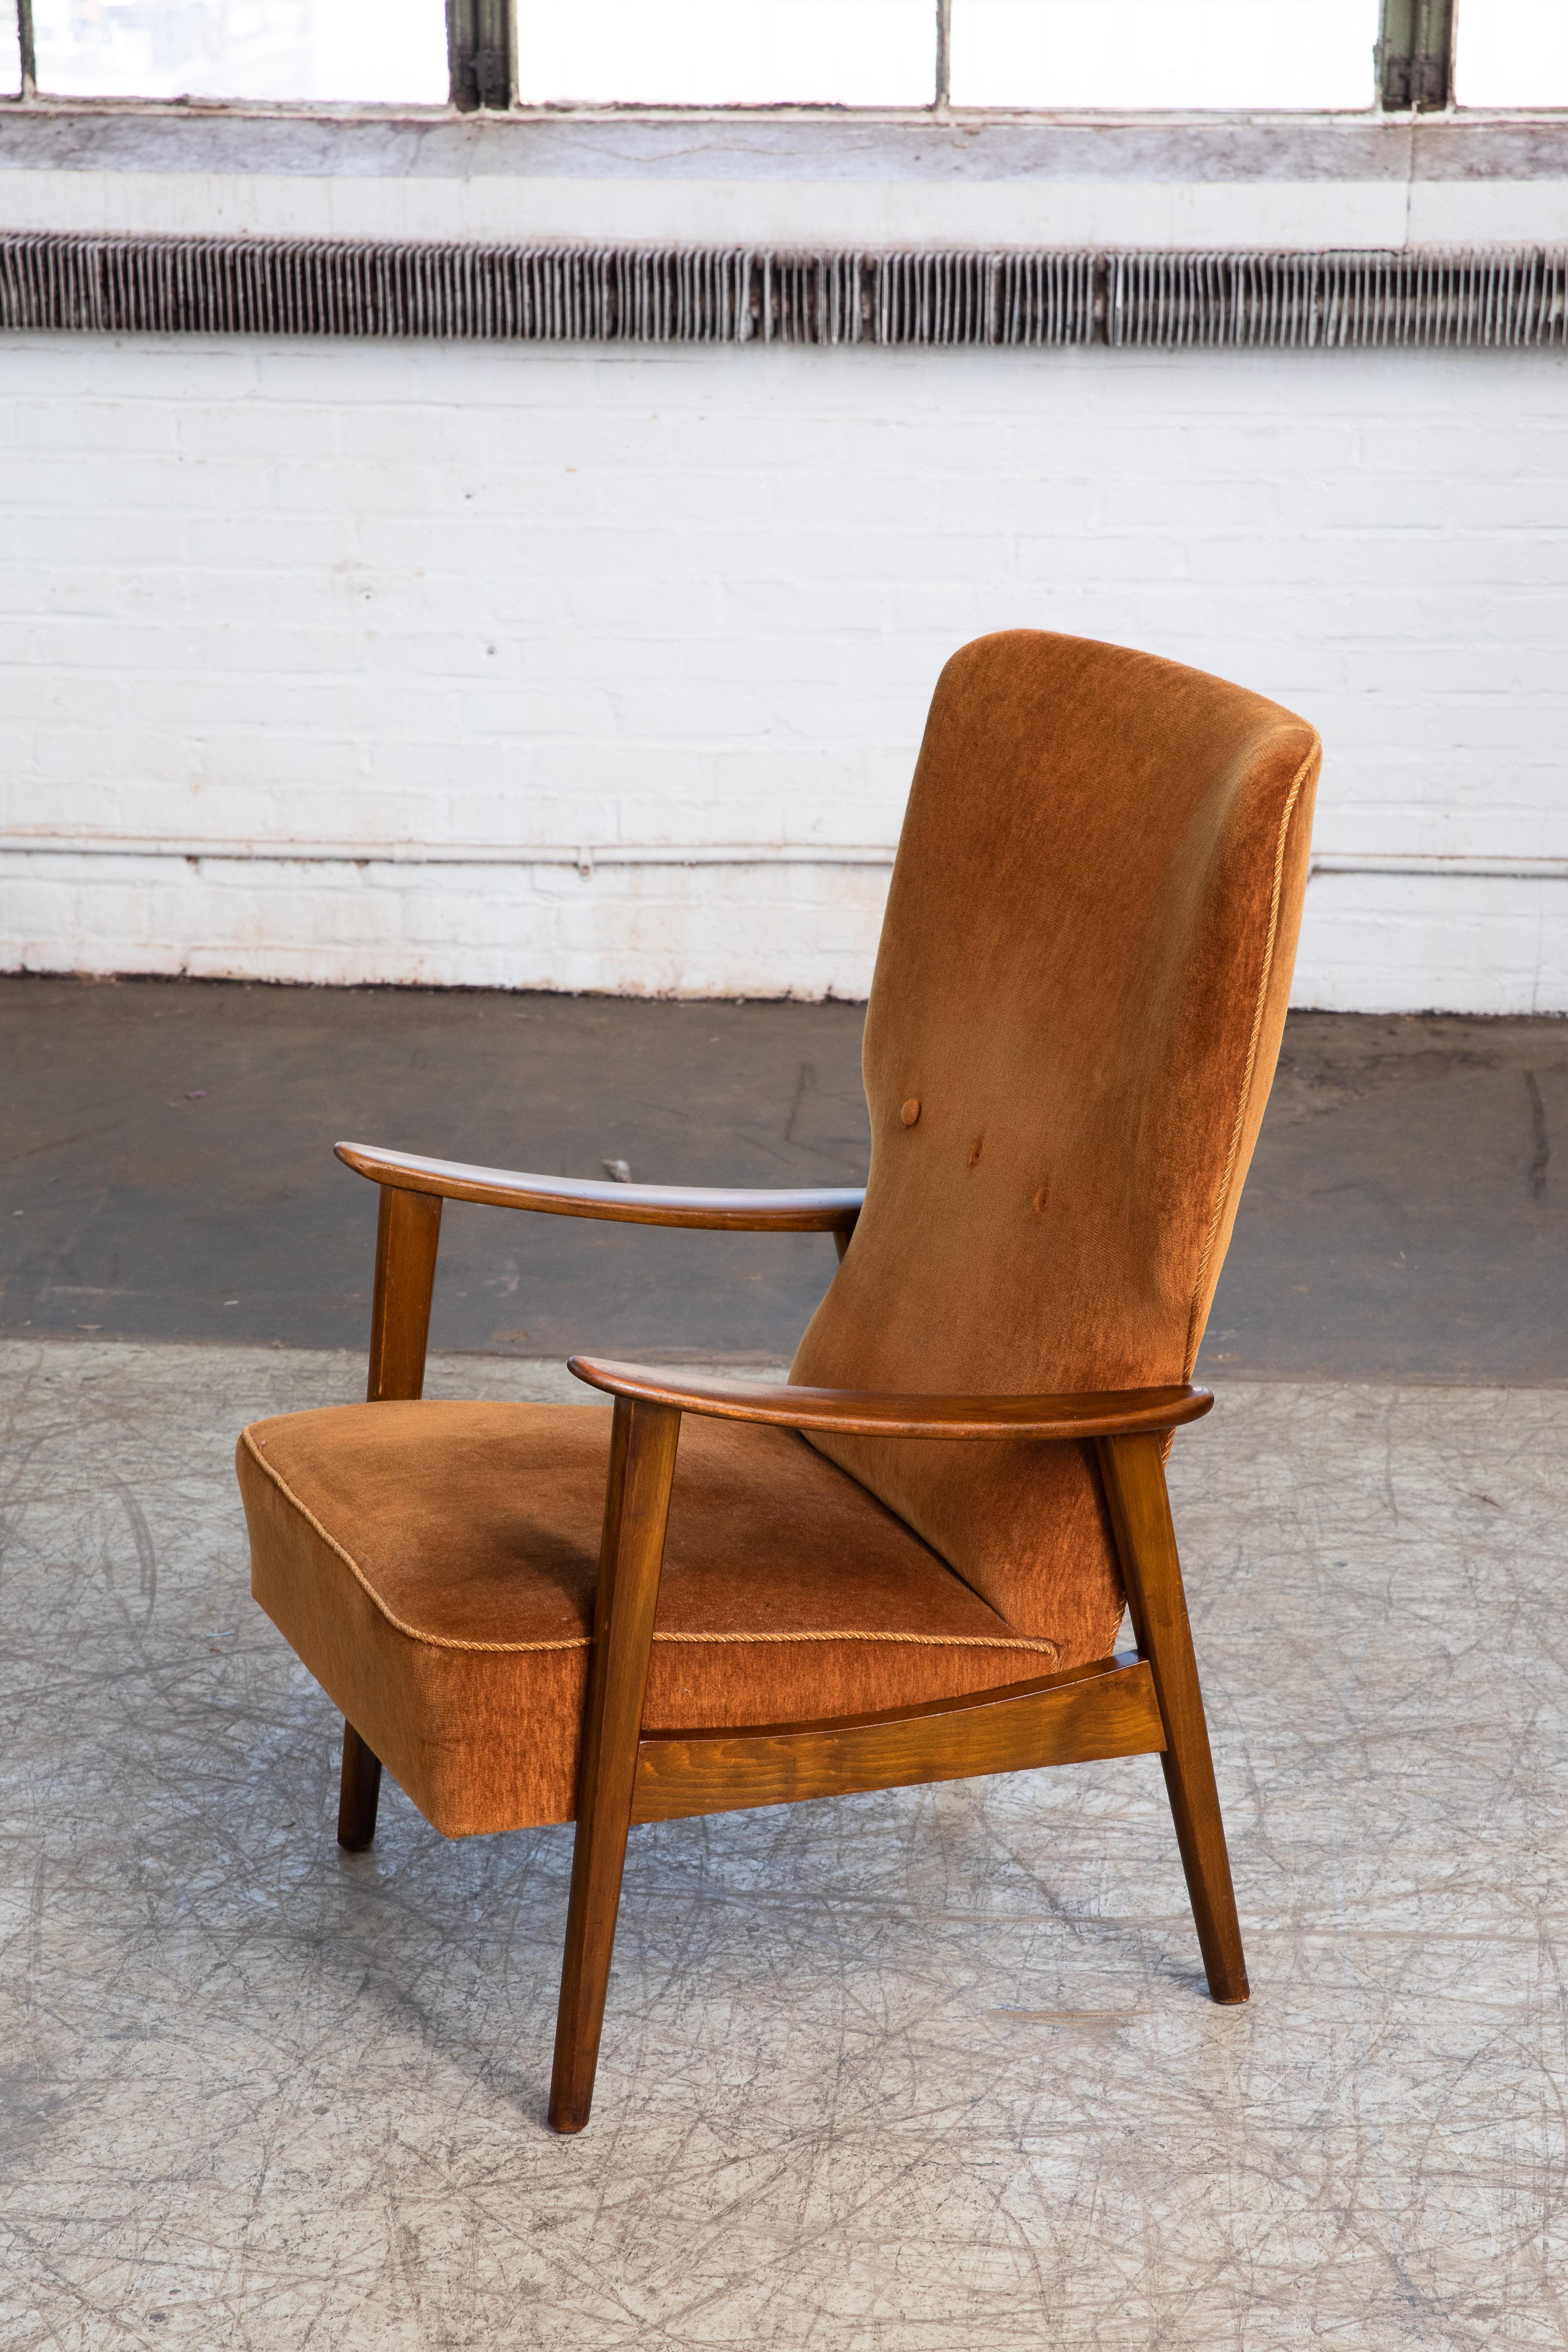 Mid-20th Century Danish Midcentury Easy Chair in Stained Oak by Fritz Hansen, ca. 1950 